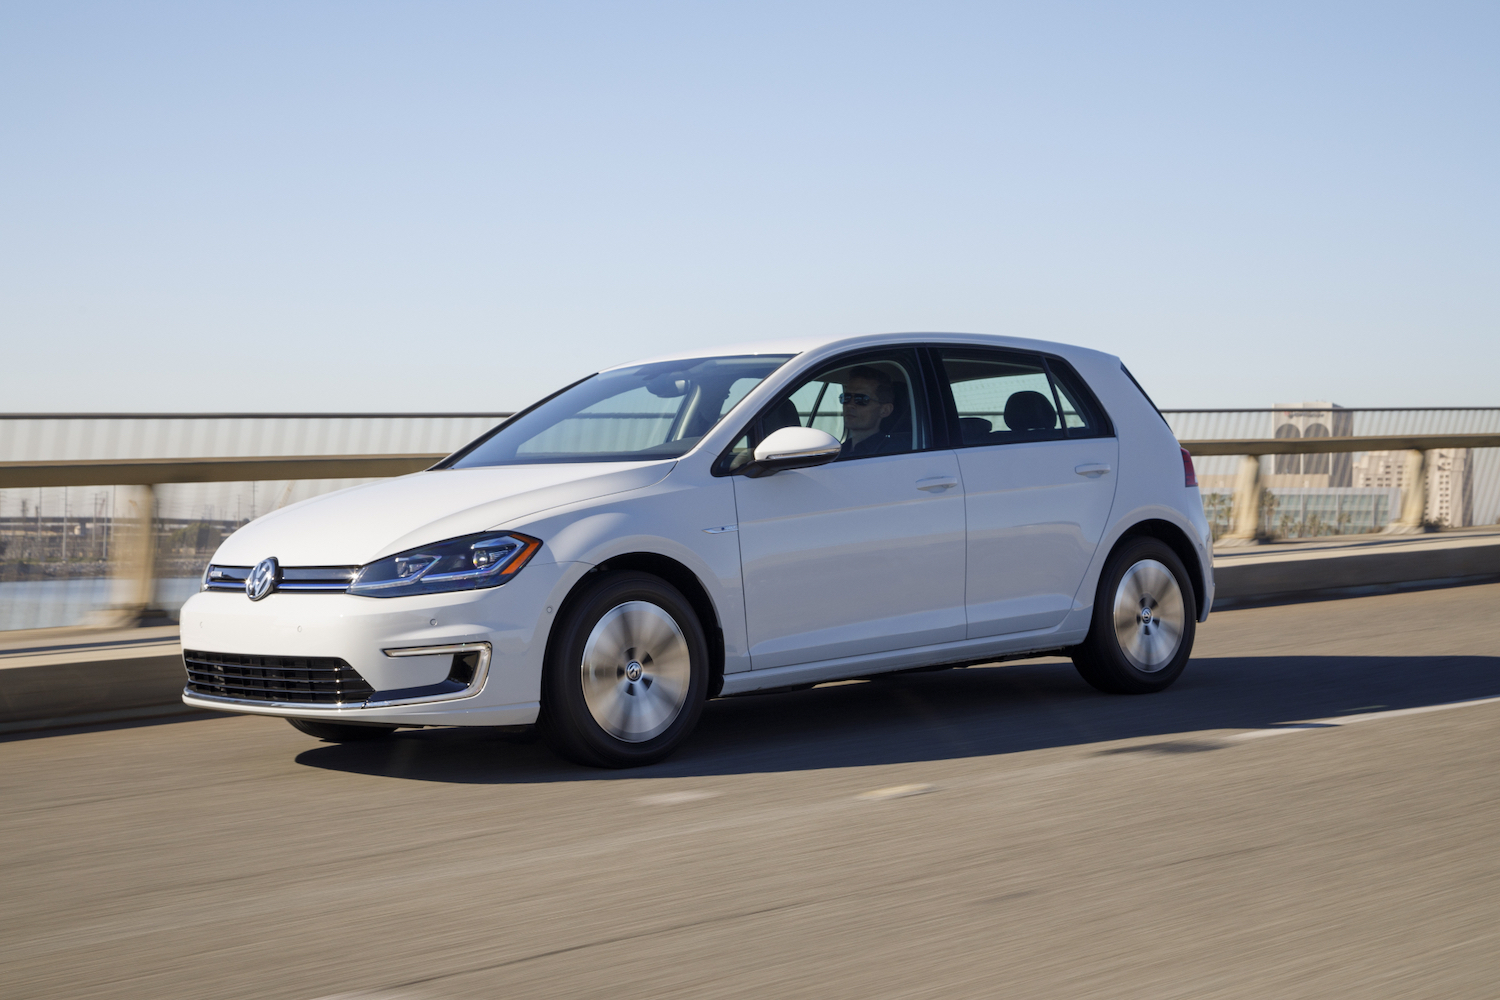 2017 Volkswagen e-Golf driving down the road in front of blue skies.